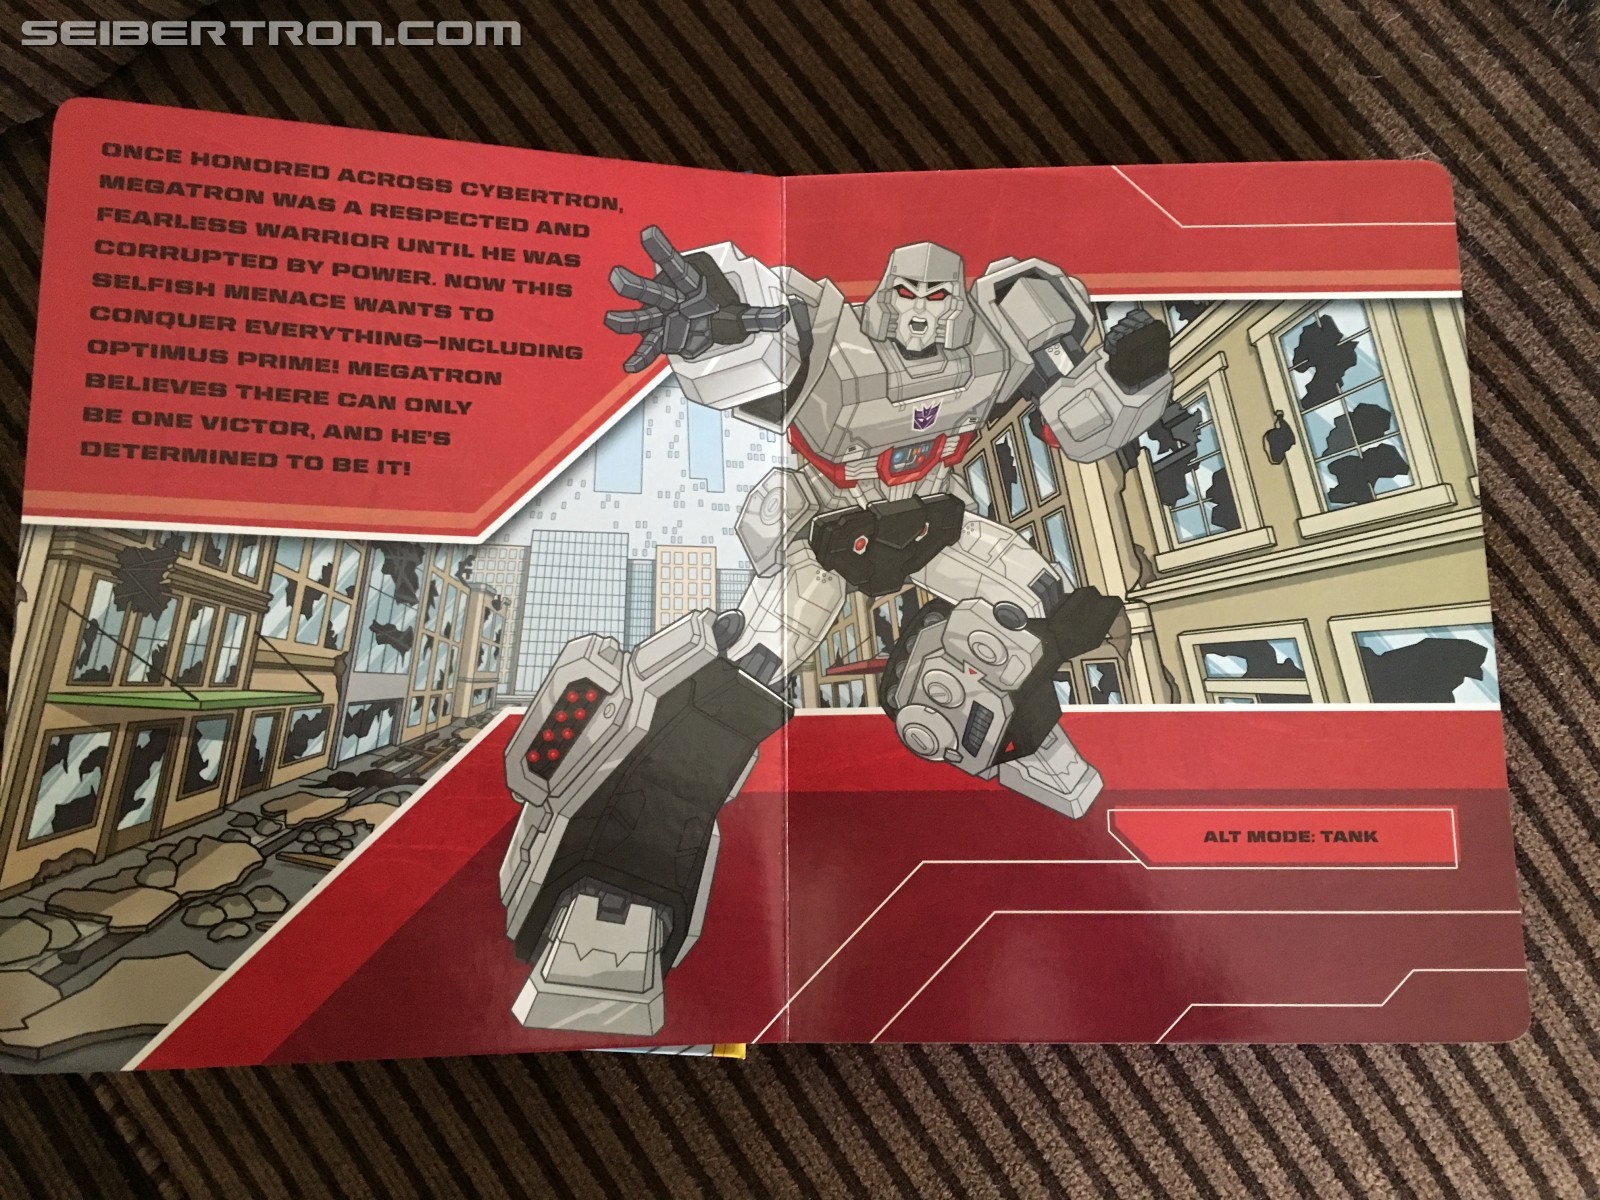 Transformers News: Transformers Busy Book sighted at US retail